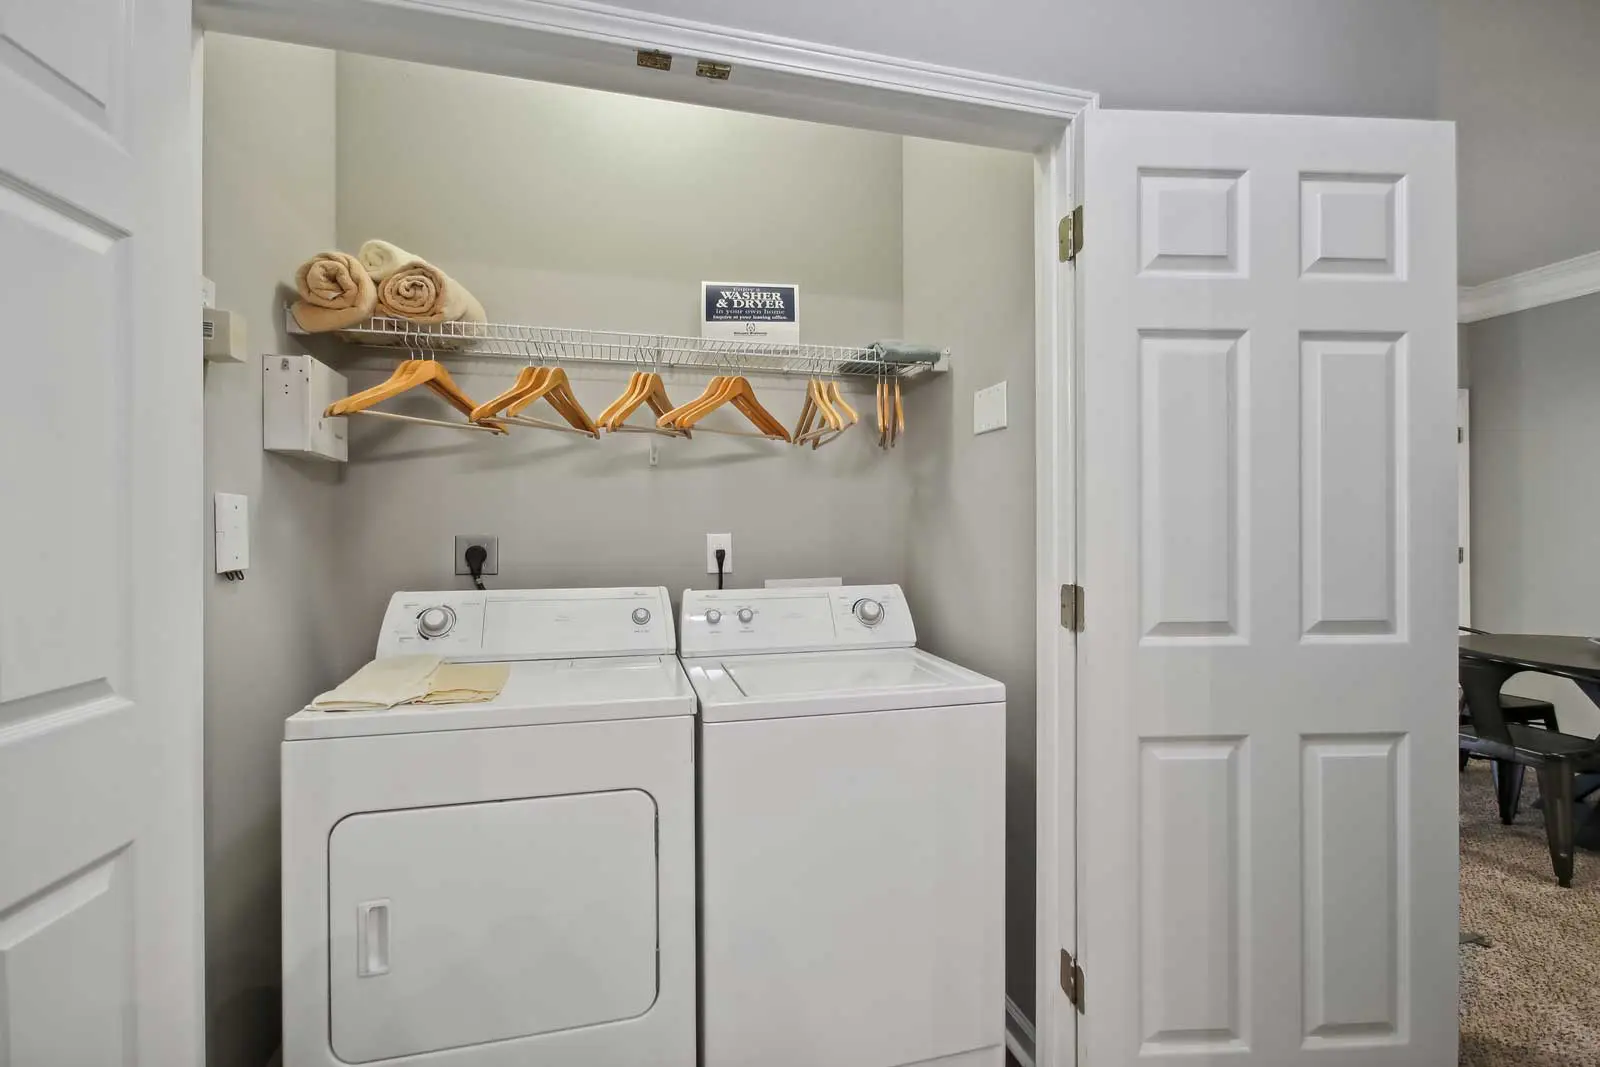 Washer and dryer closet